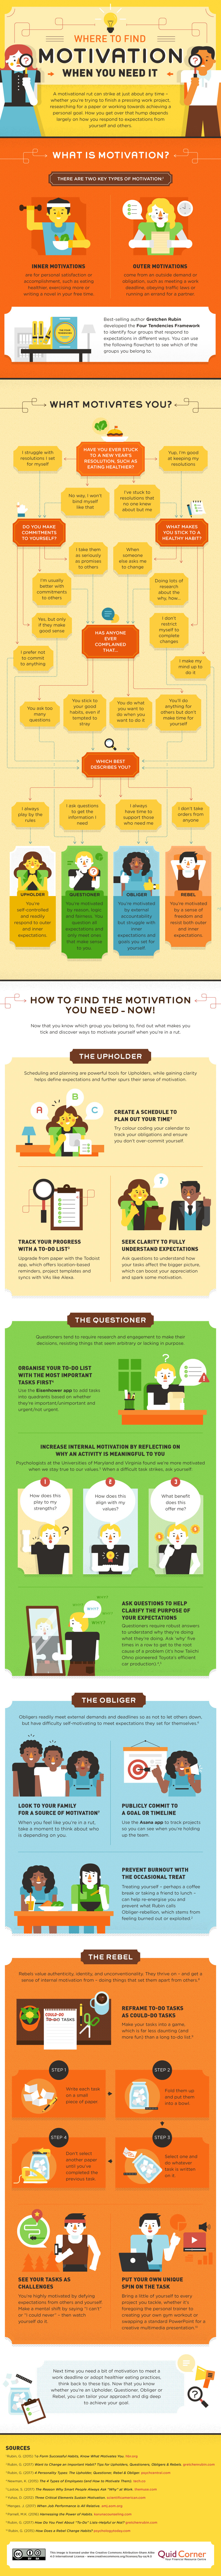 Where to Find Motivation When You Need It Infographic